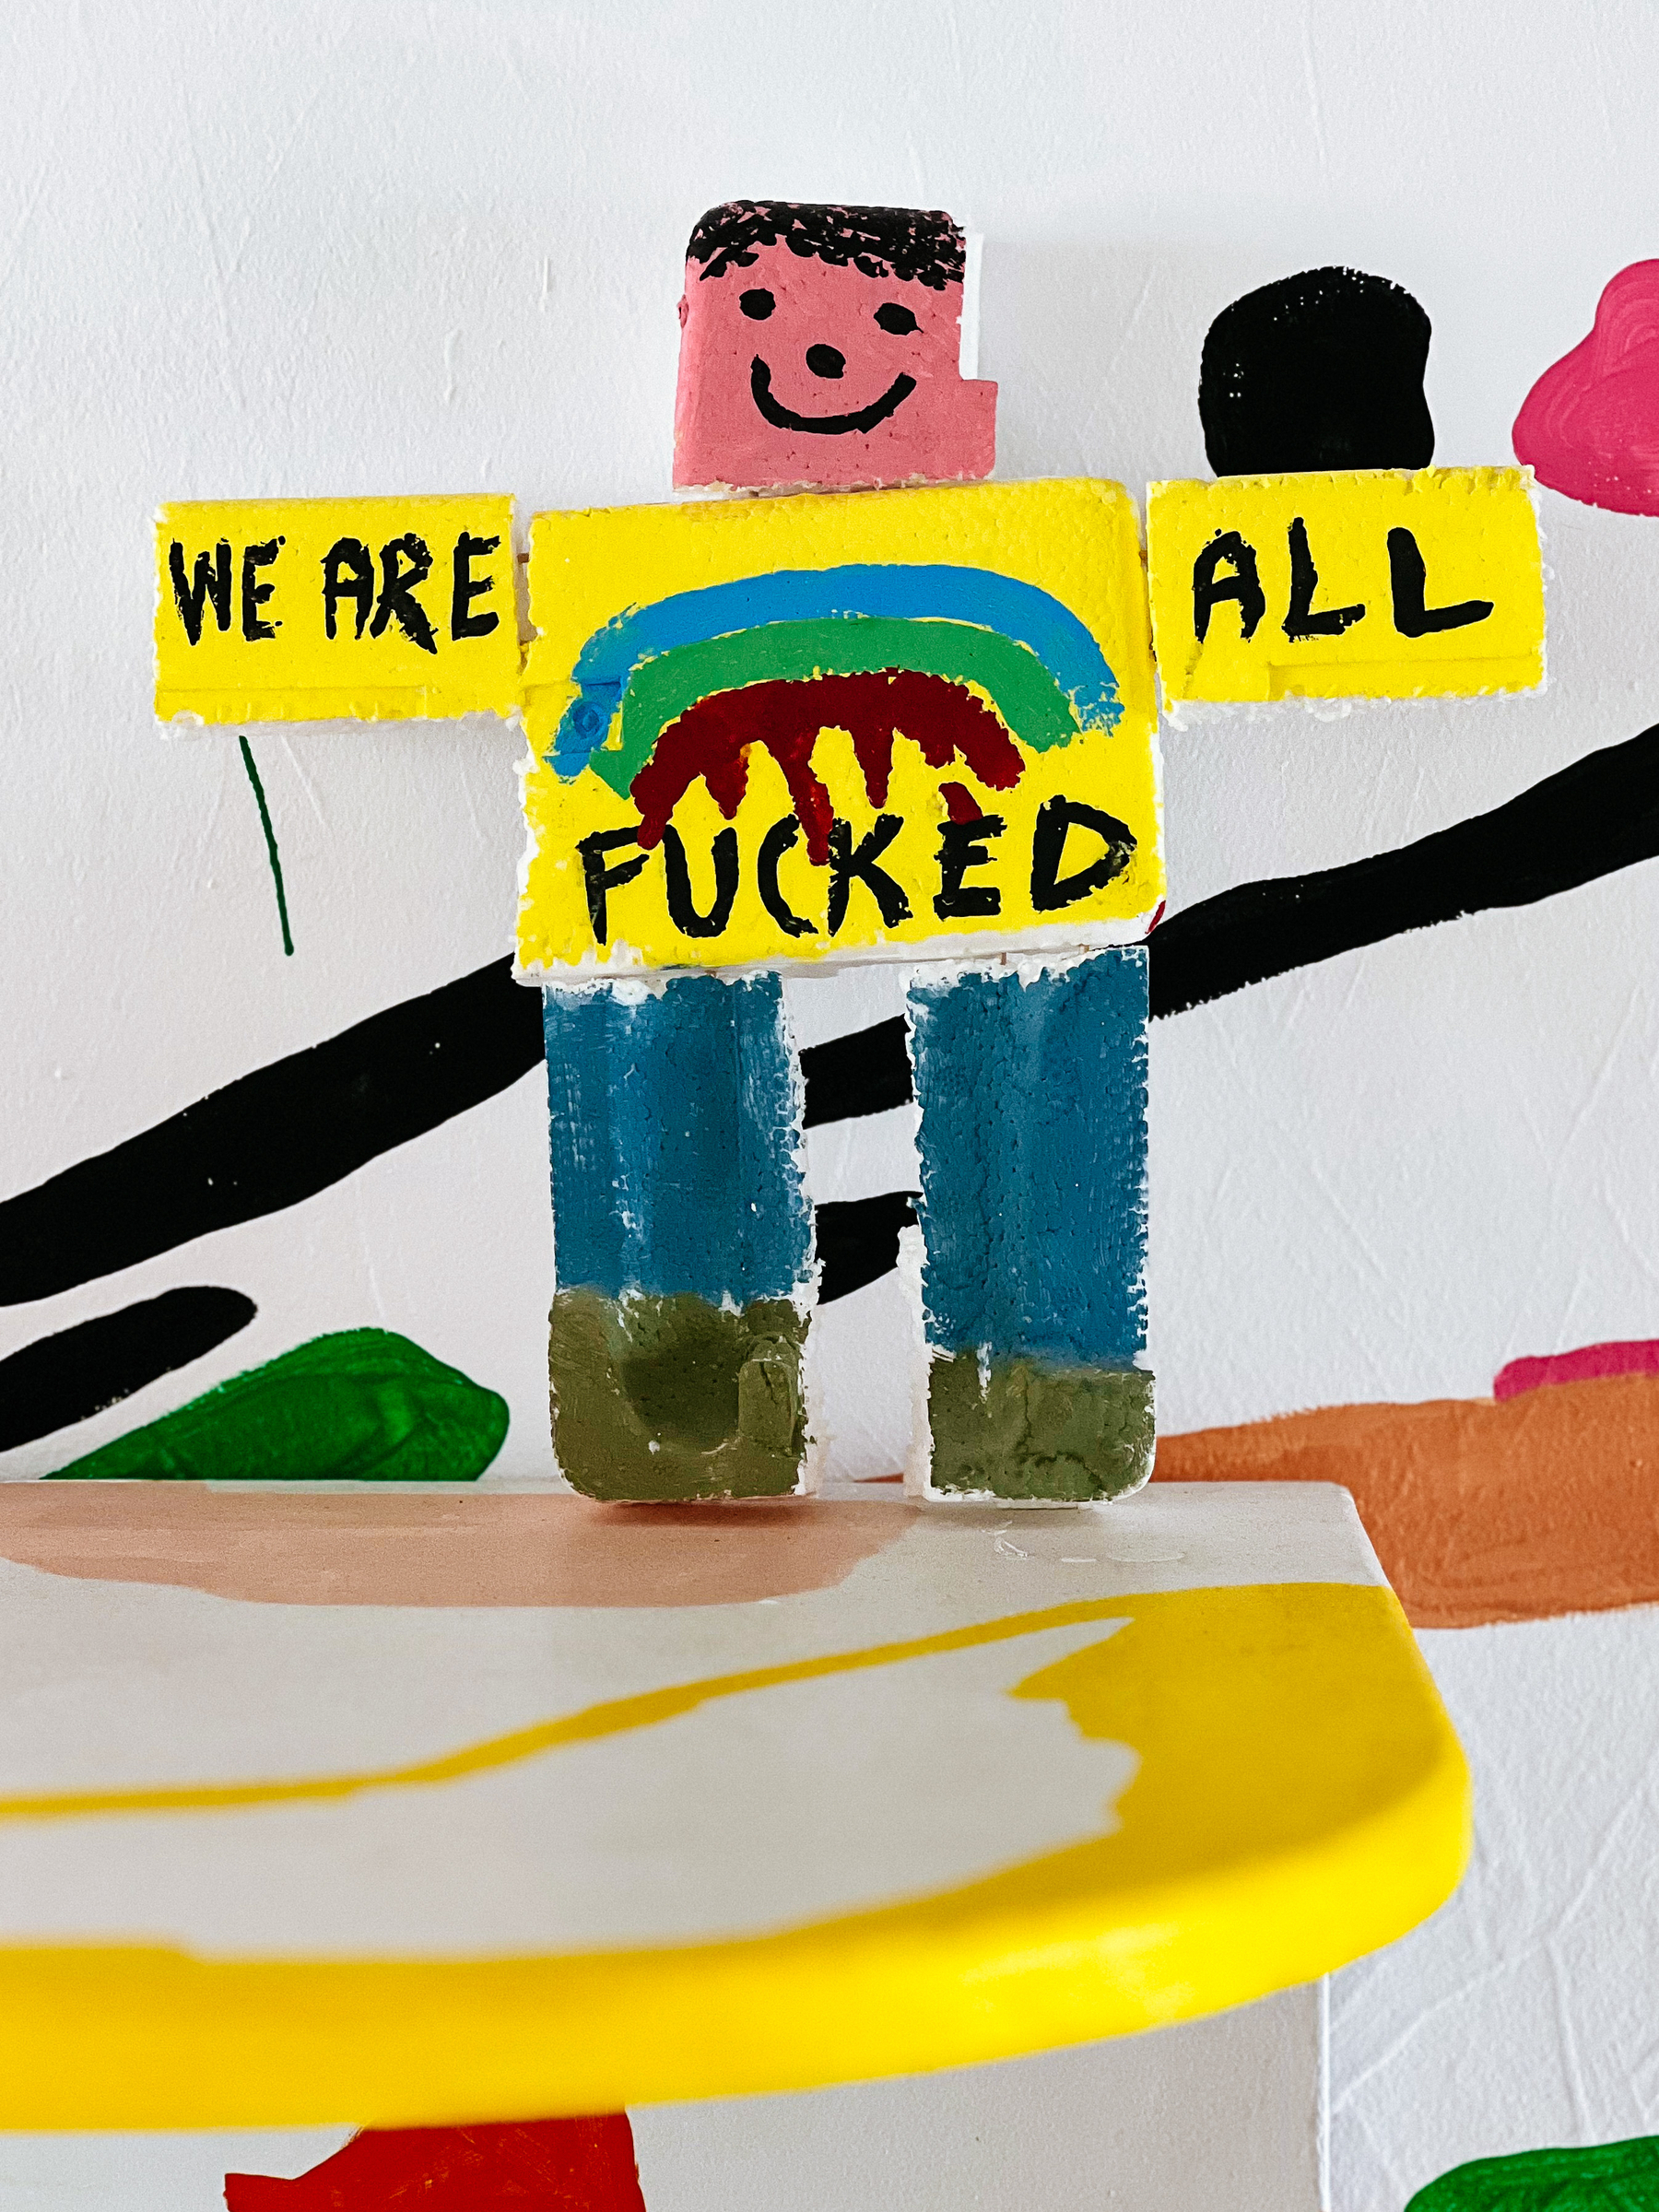 A strange doll with the words “we are all fucked” written on it